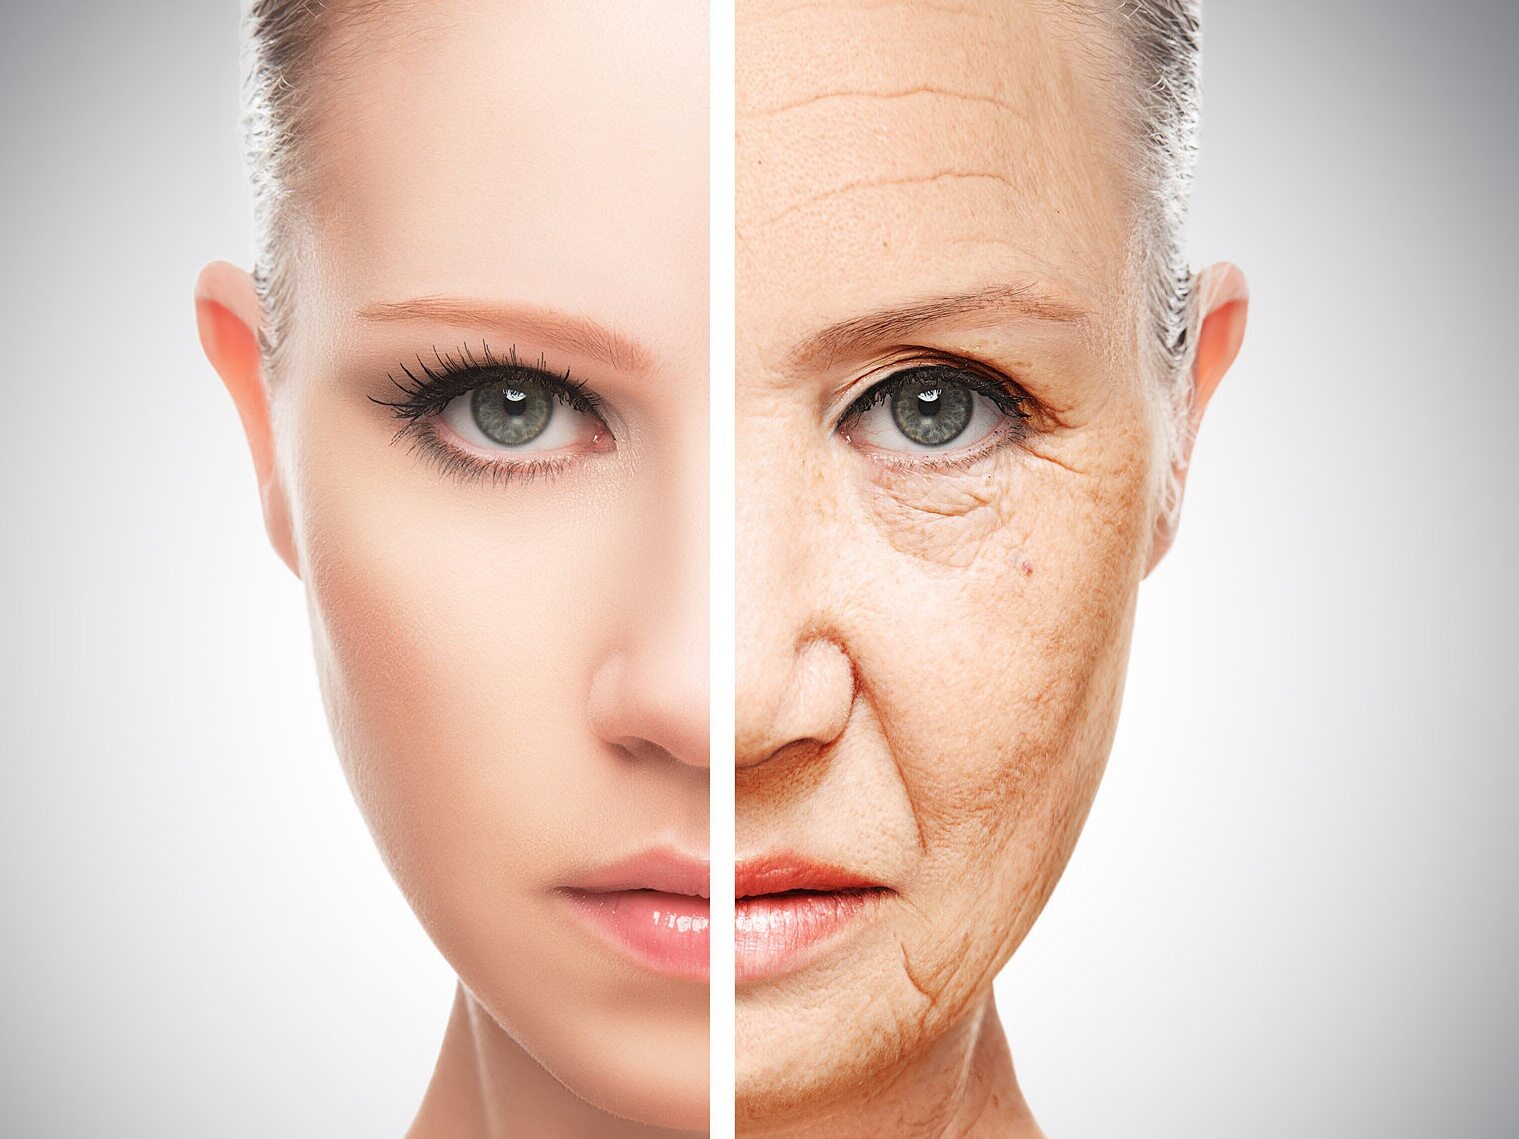 How to slow down skin aging